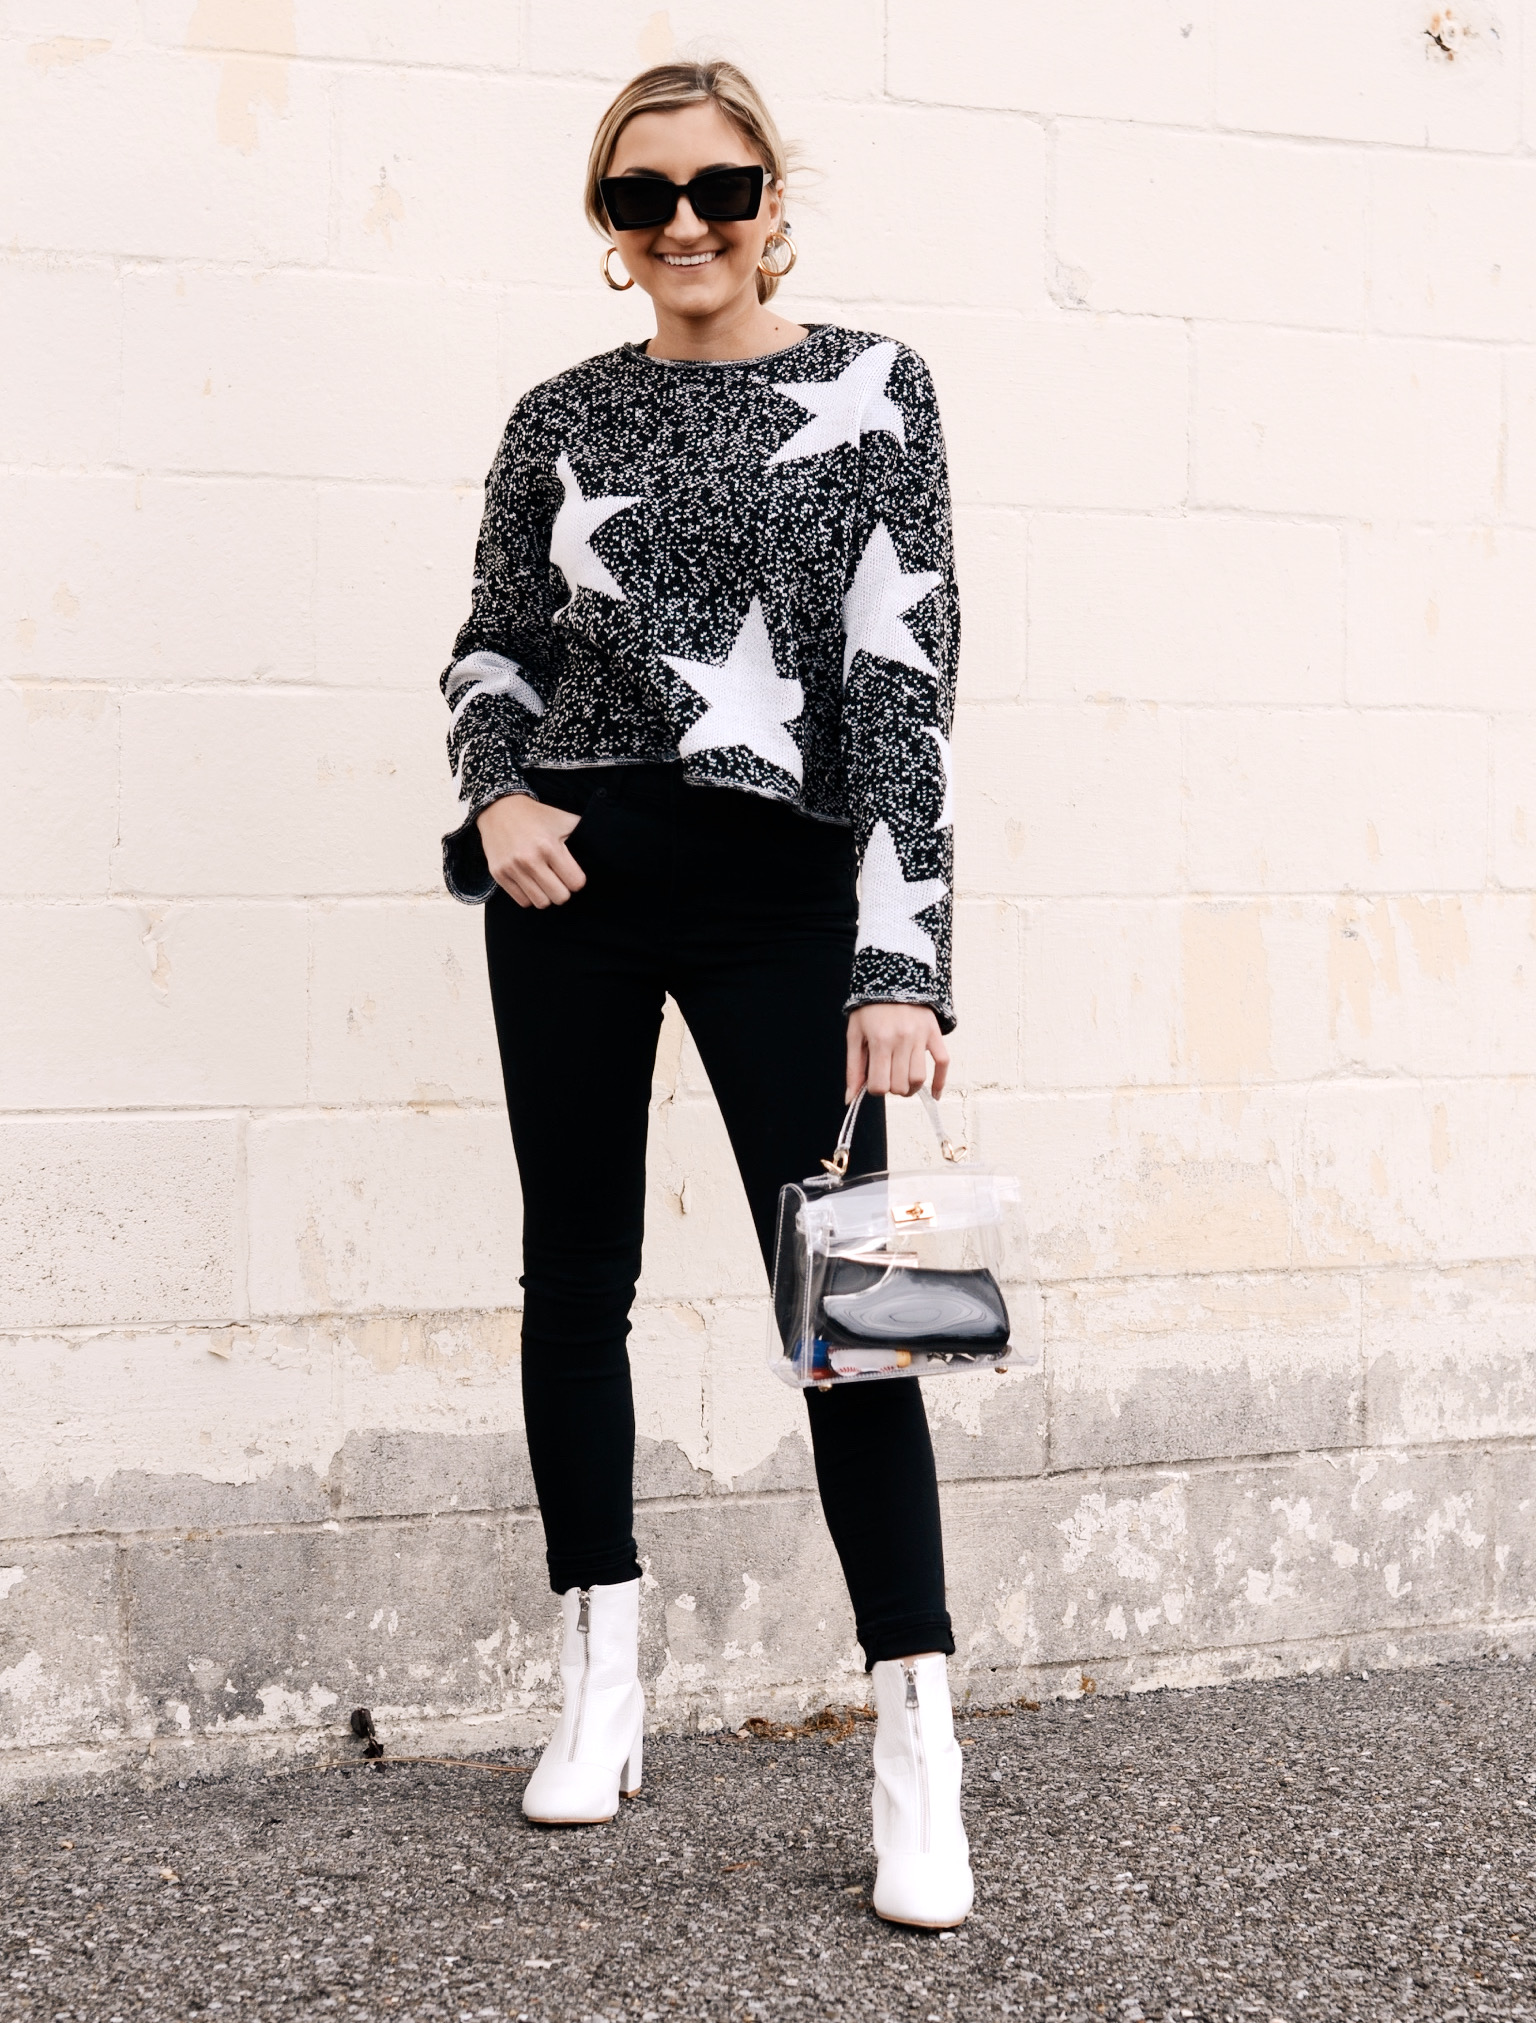 Trends To Follow This Winter With New SheIn Pieces